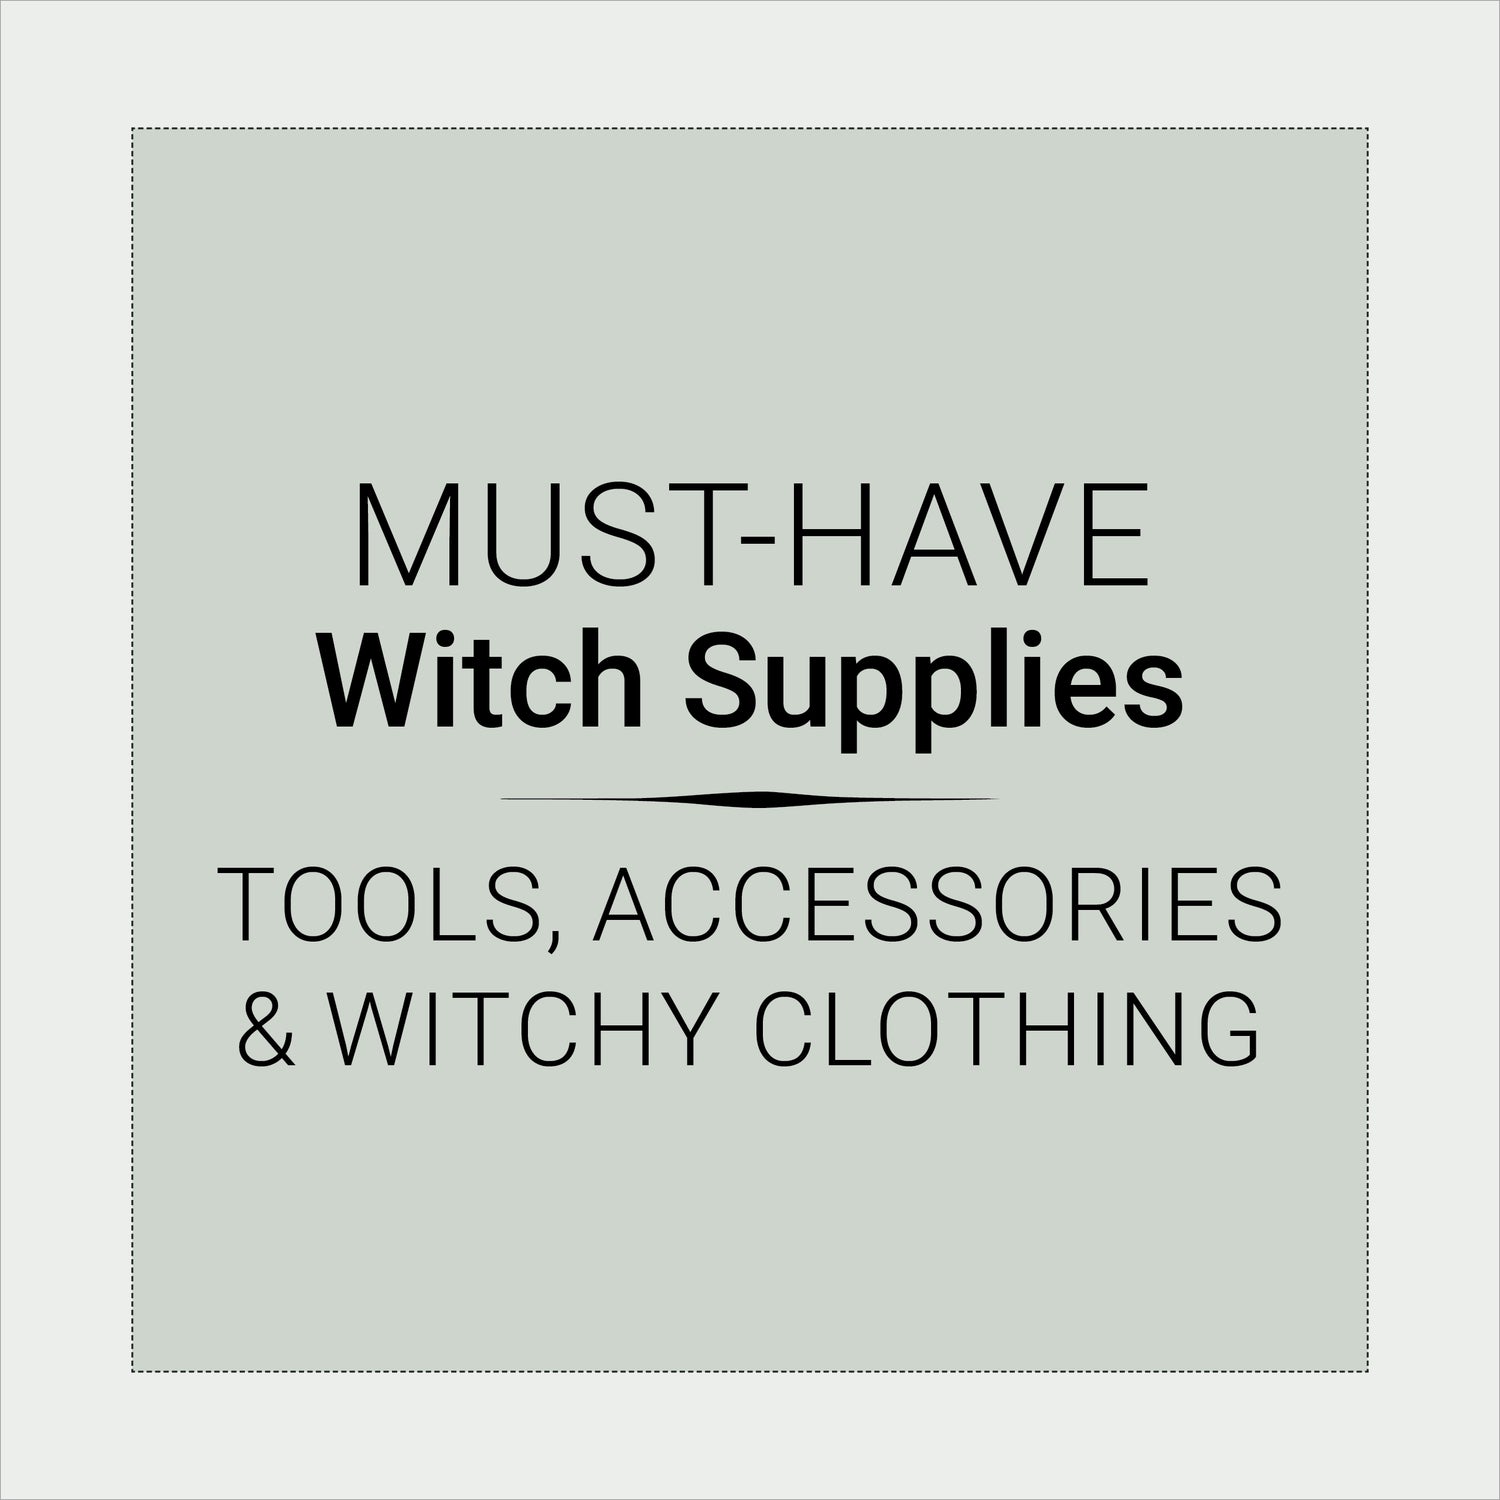 Must-have Witch Supplies and Tools Every Practitioner Needs